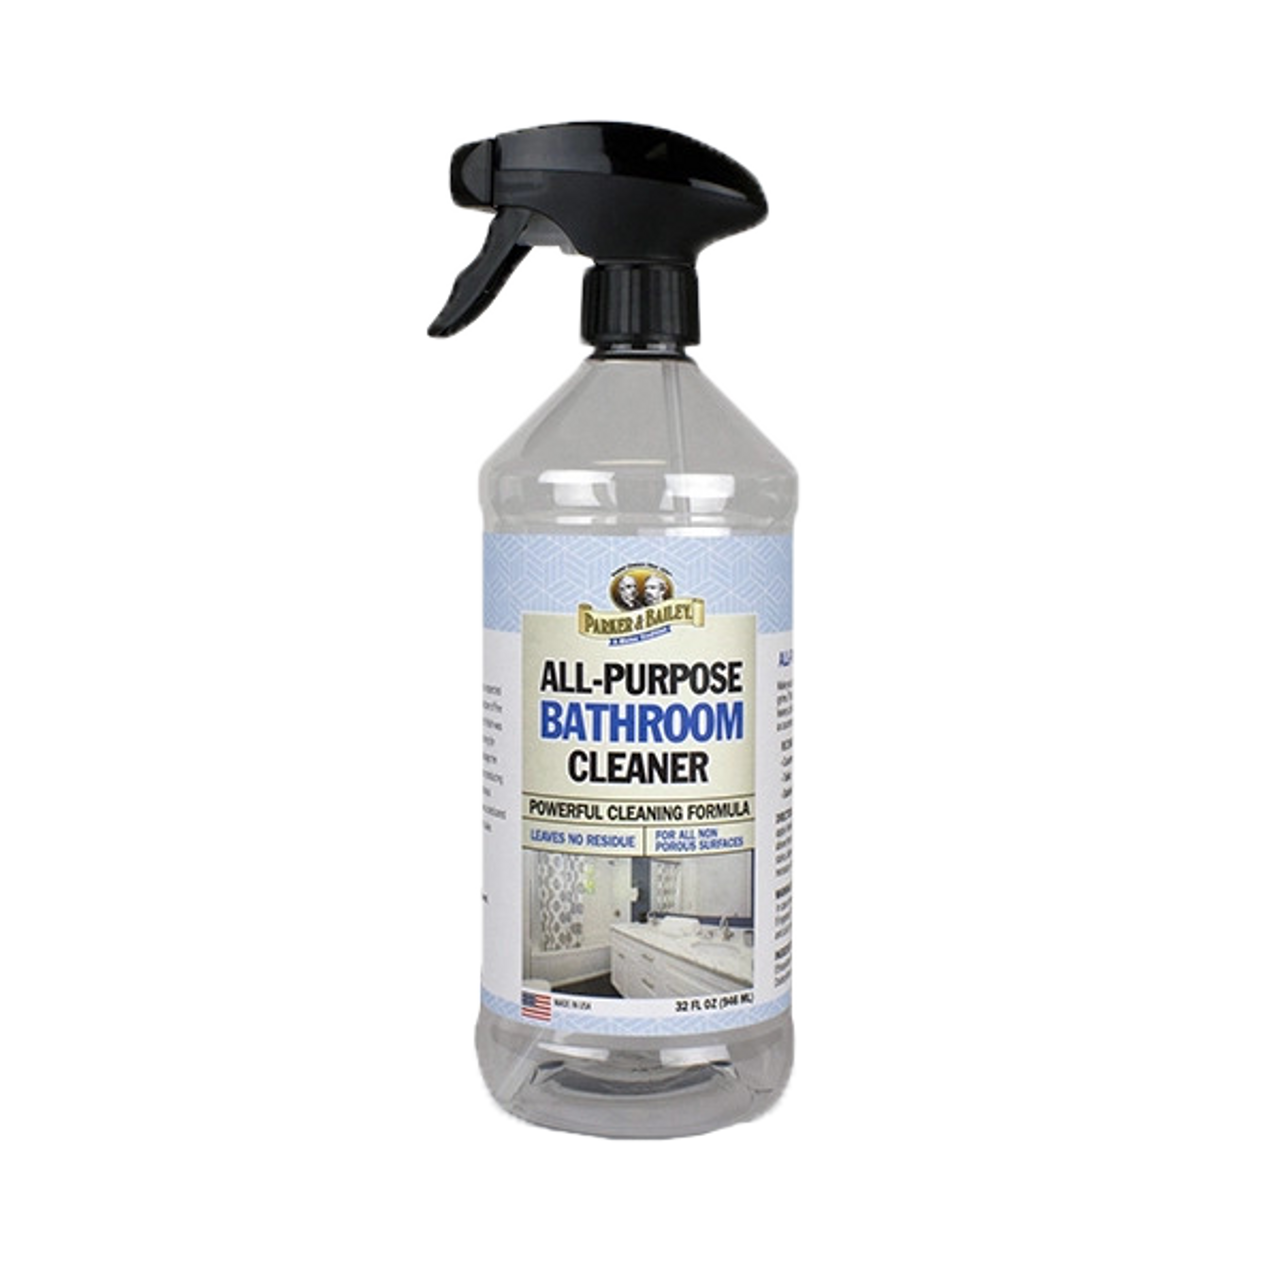 Parker & Bailey All-Purpose Bathroom Cleaner - Parker Bailey new store